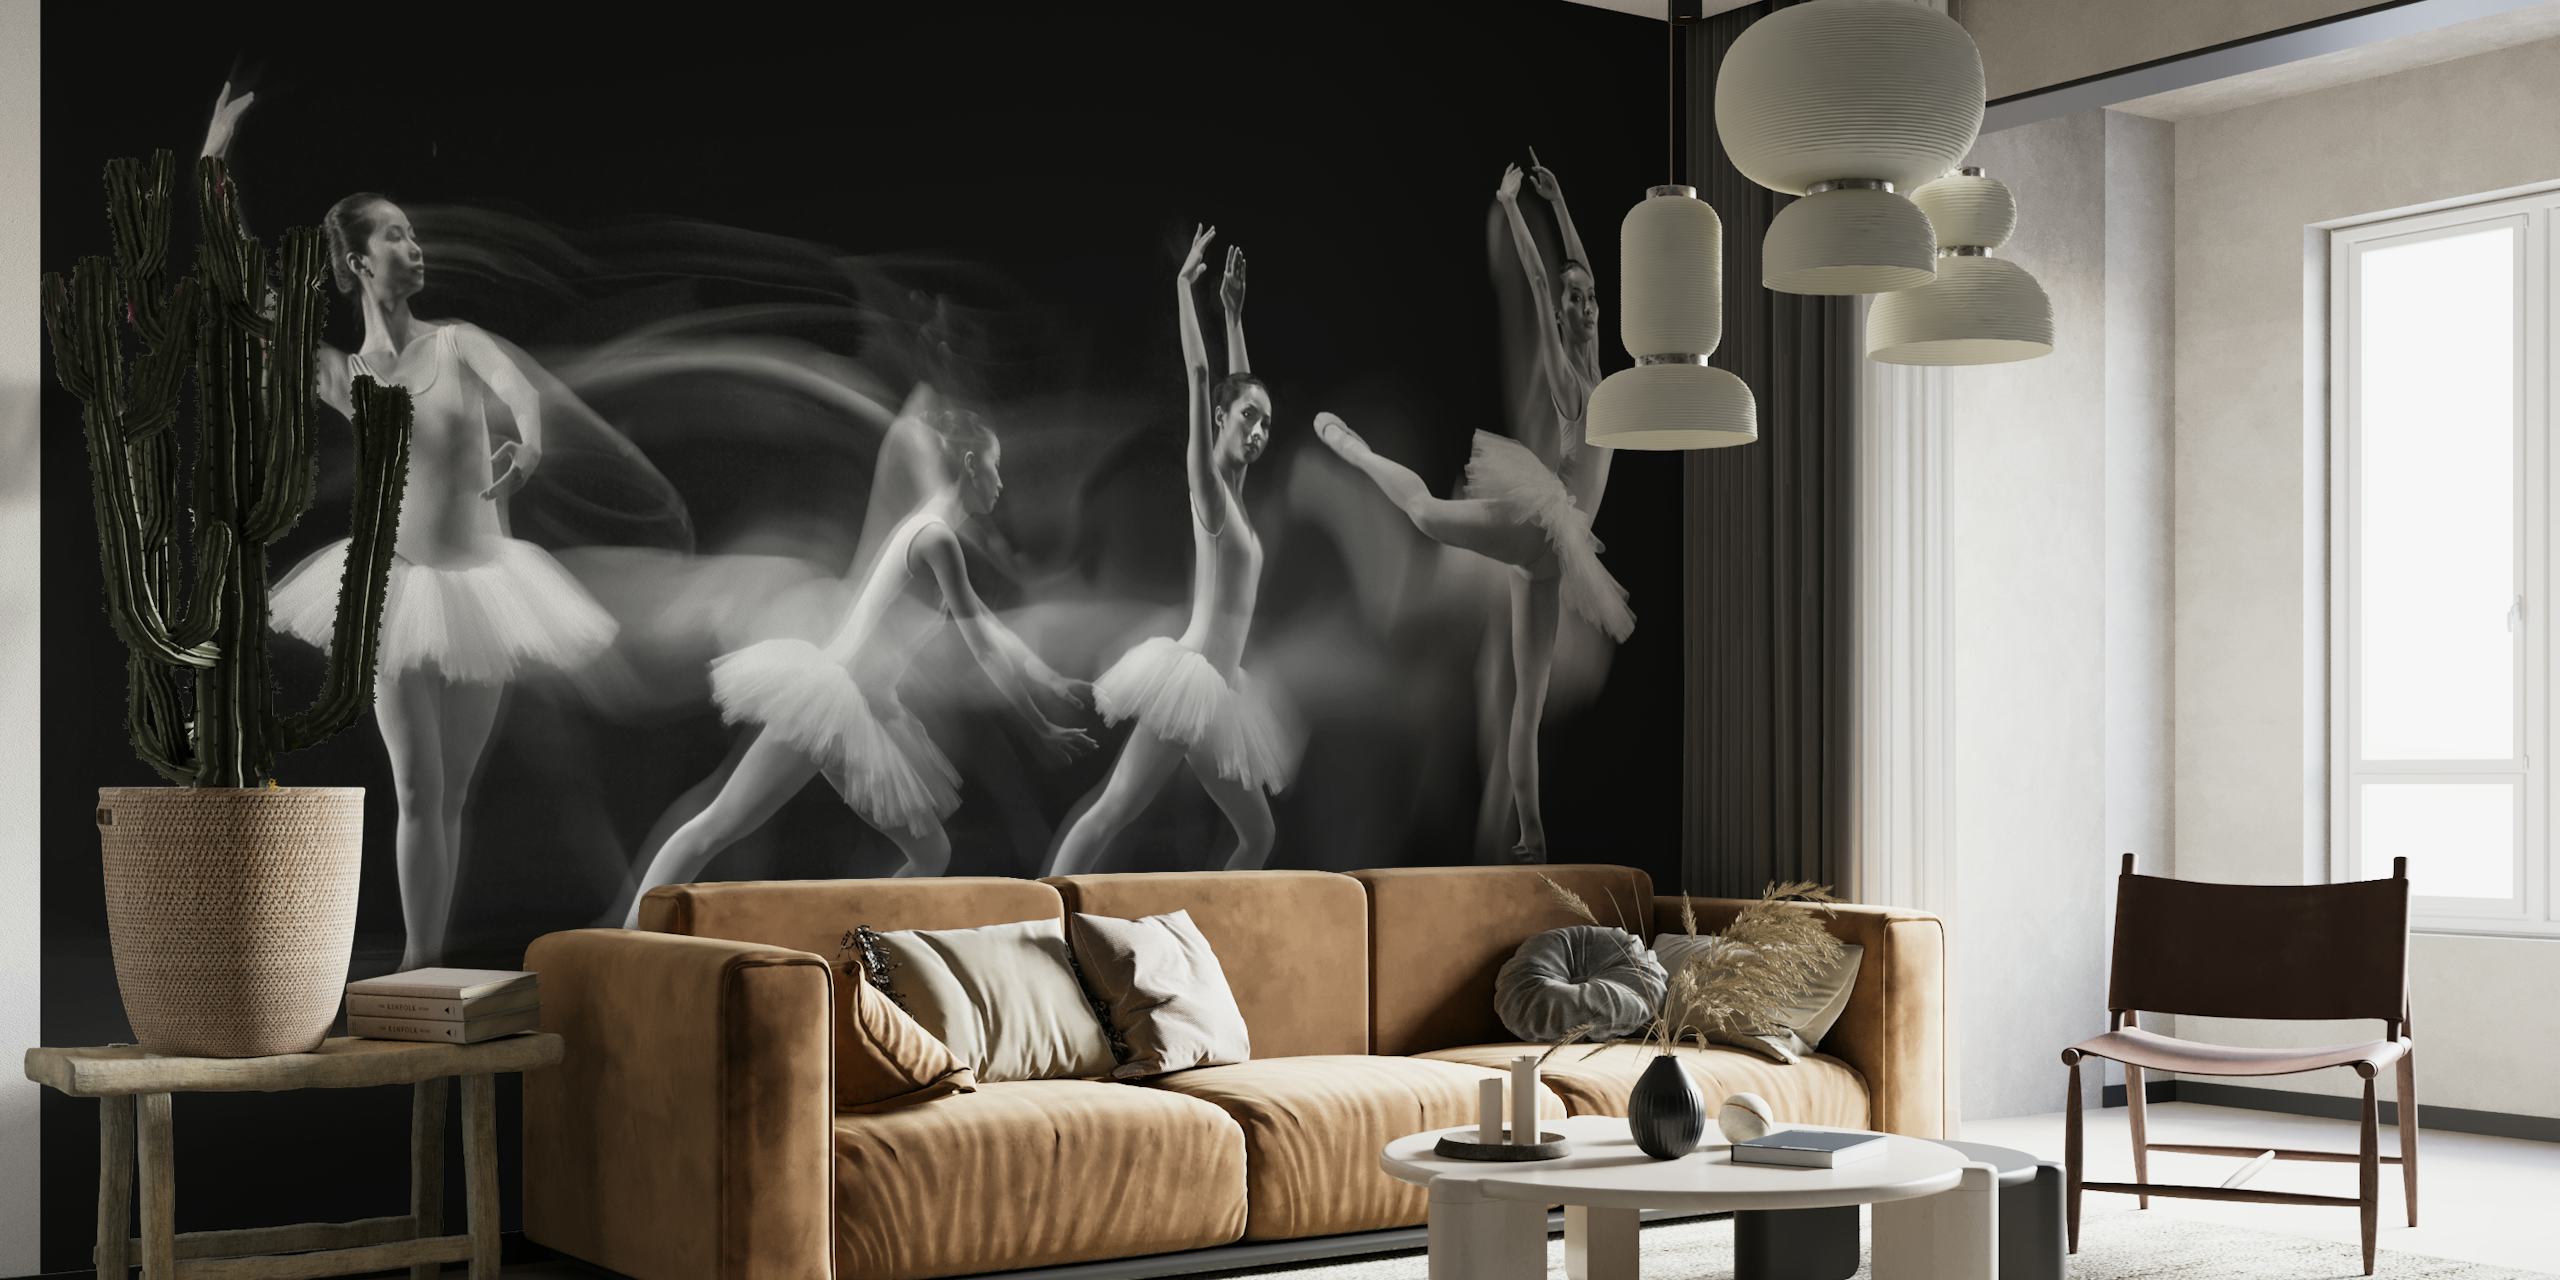 Black and white ballet dancers wall mural forming an artistic wave